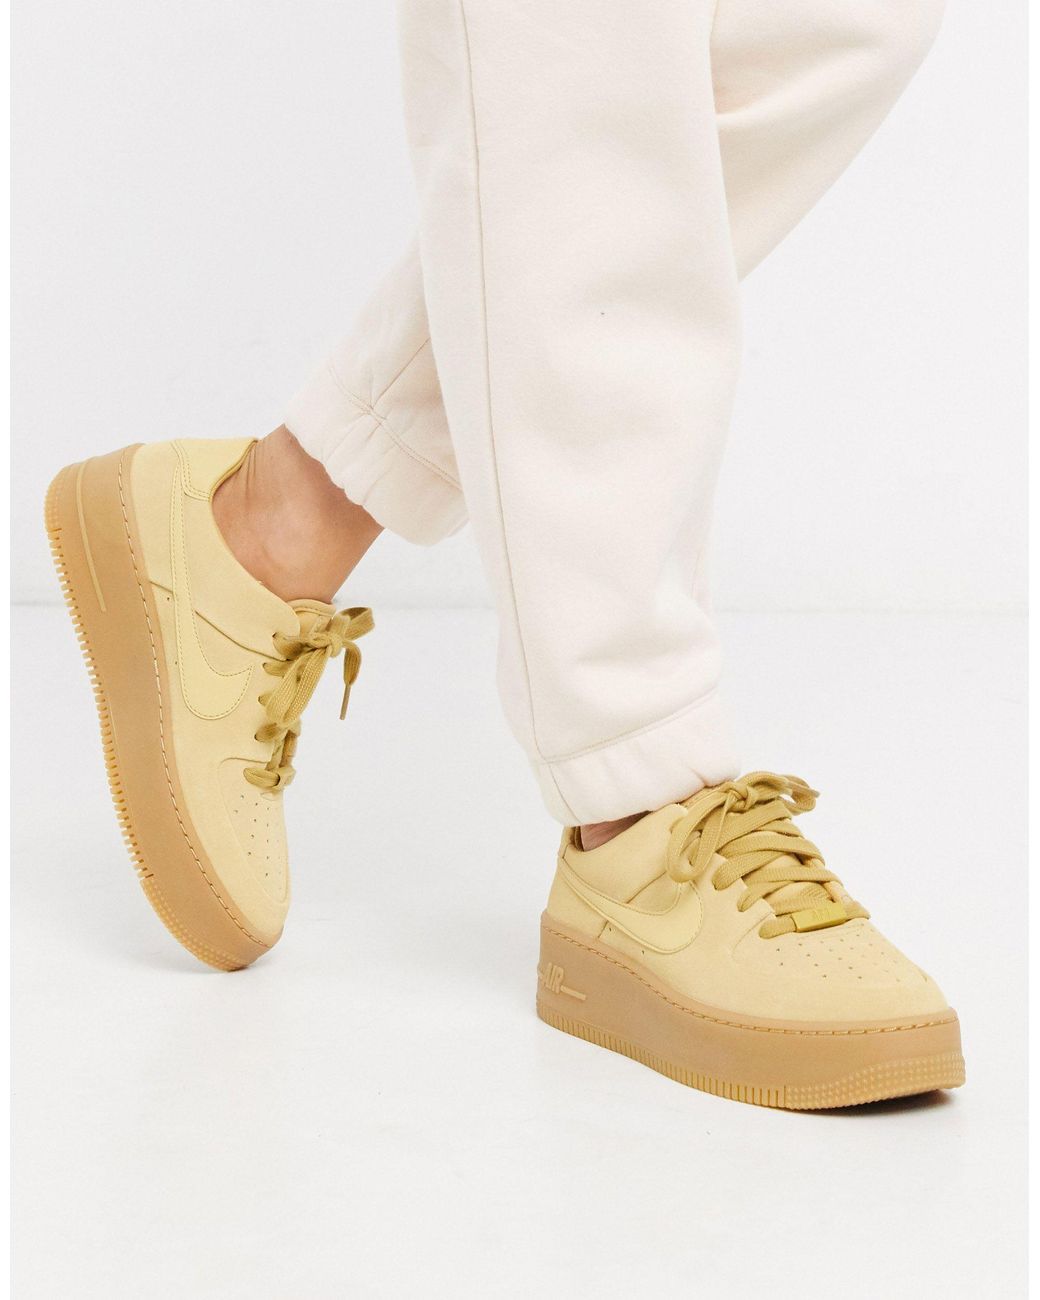 Nike Beige With Gum Sole Air Force 1 Sage Sneakers-cream in Natural | Lyst  Australia